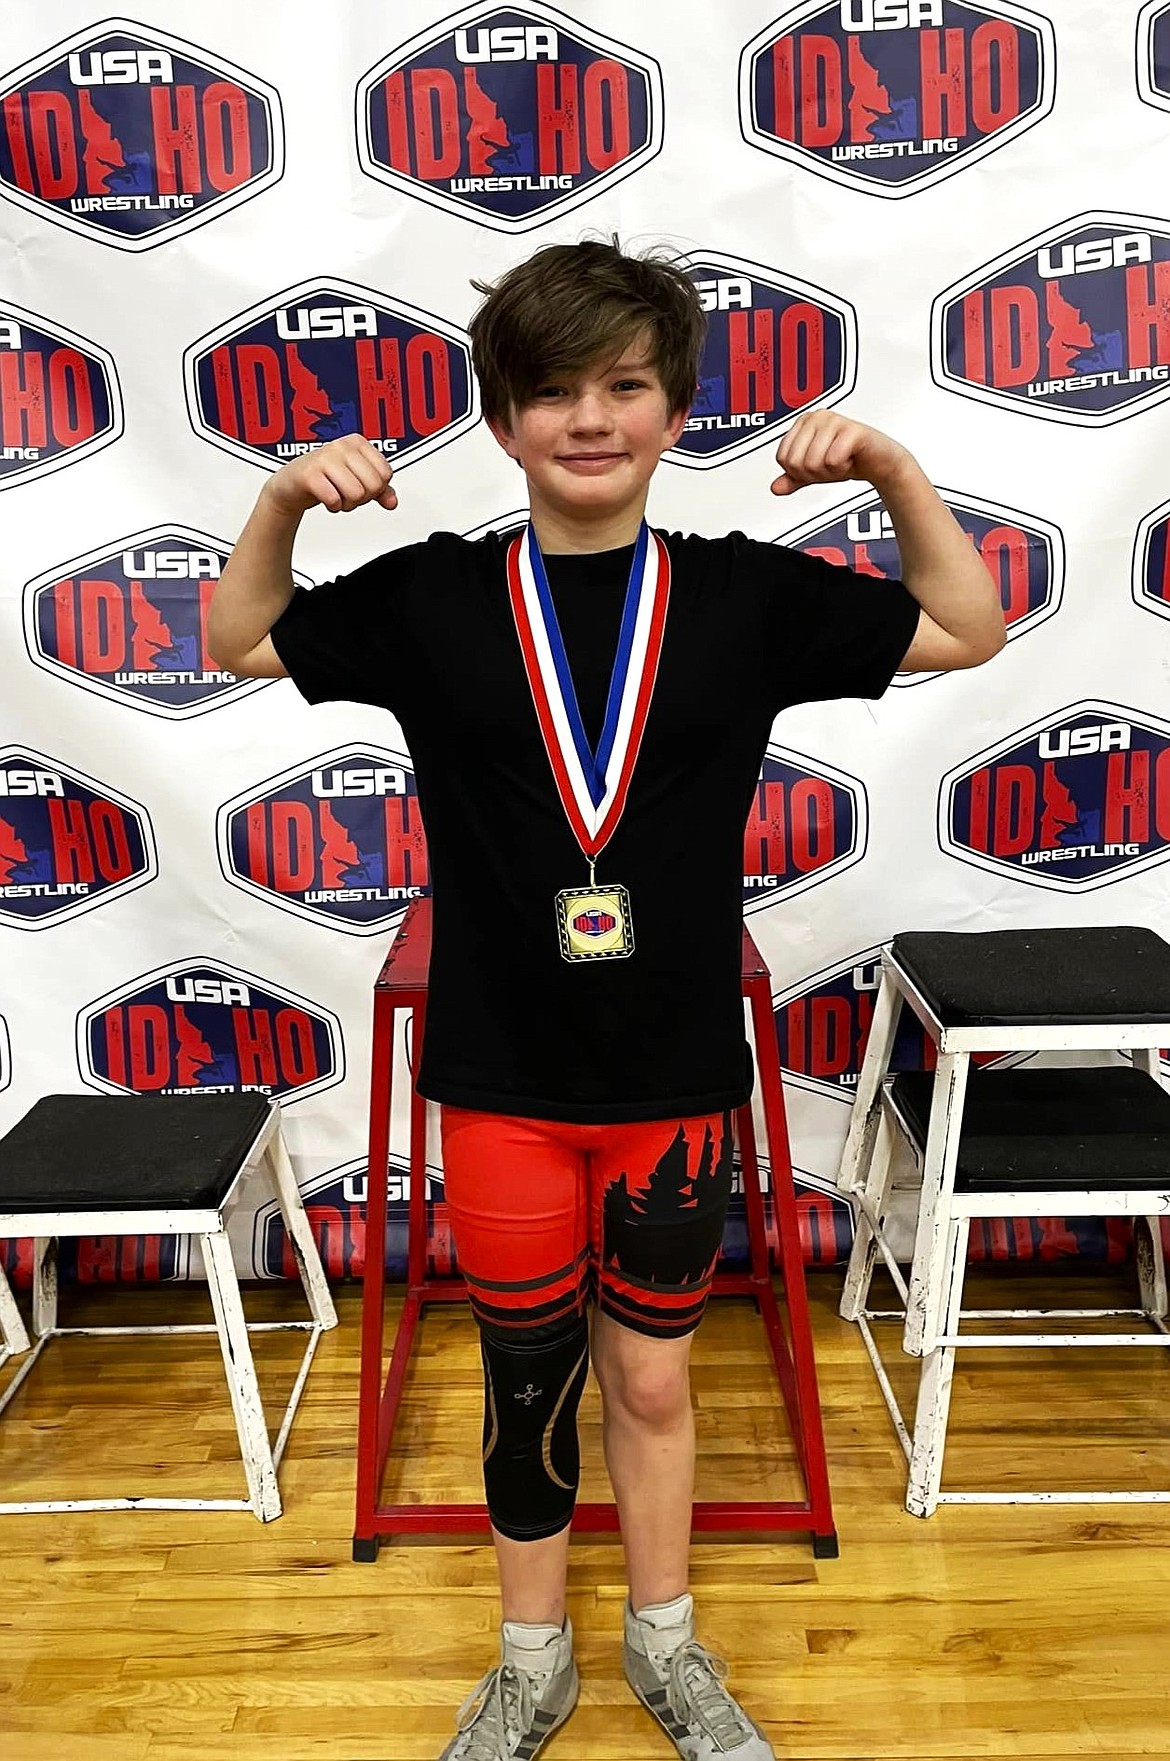 Blake Nichols took fifth for 5th-6th grades at the Idaho State Folkstyle Championships on Feb. 10.